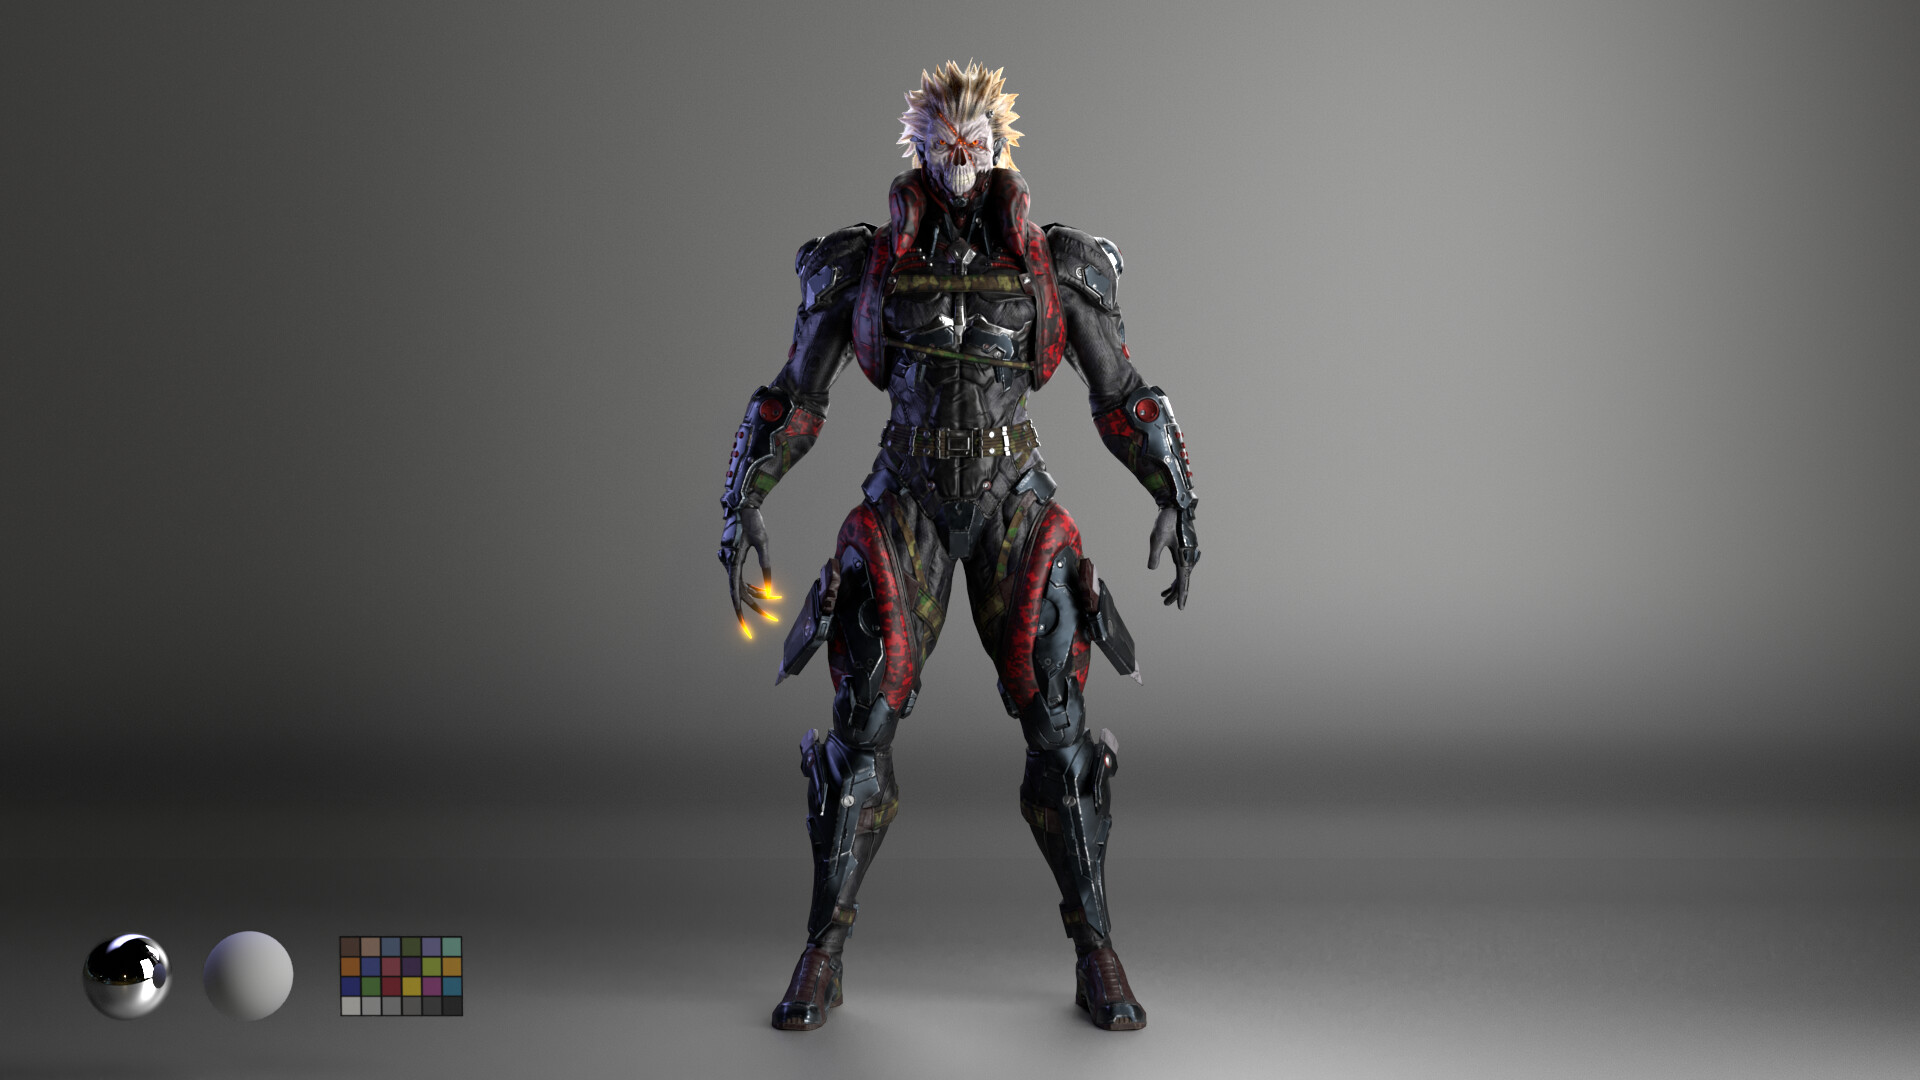 ArtStation - fan made metal gear rising character named chico